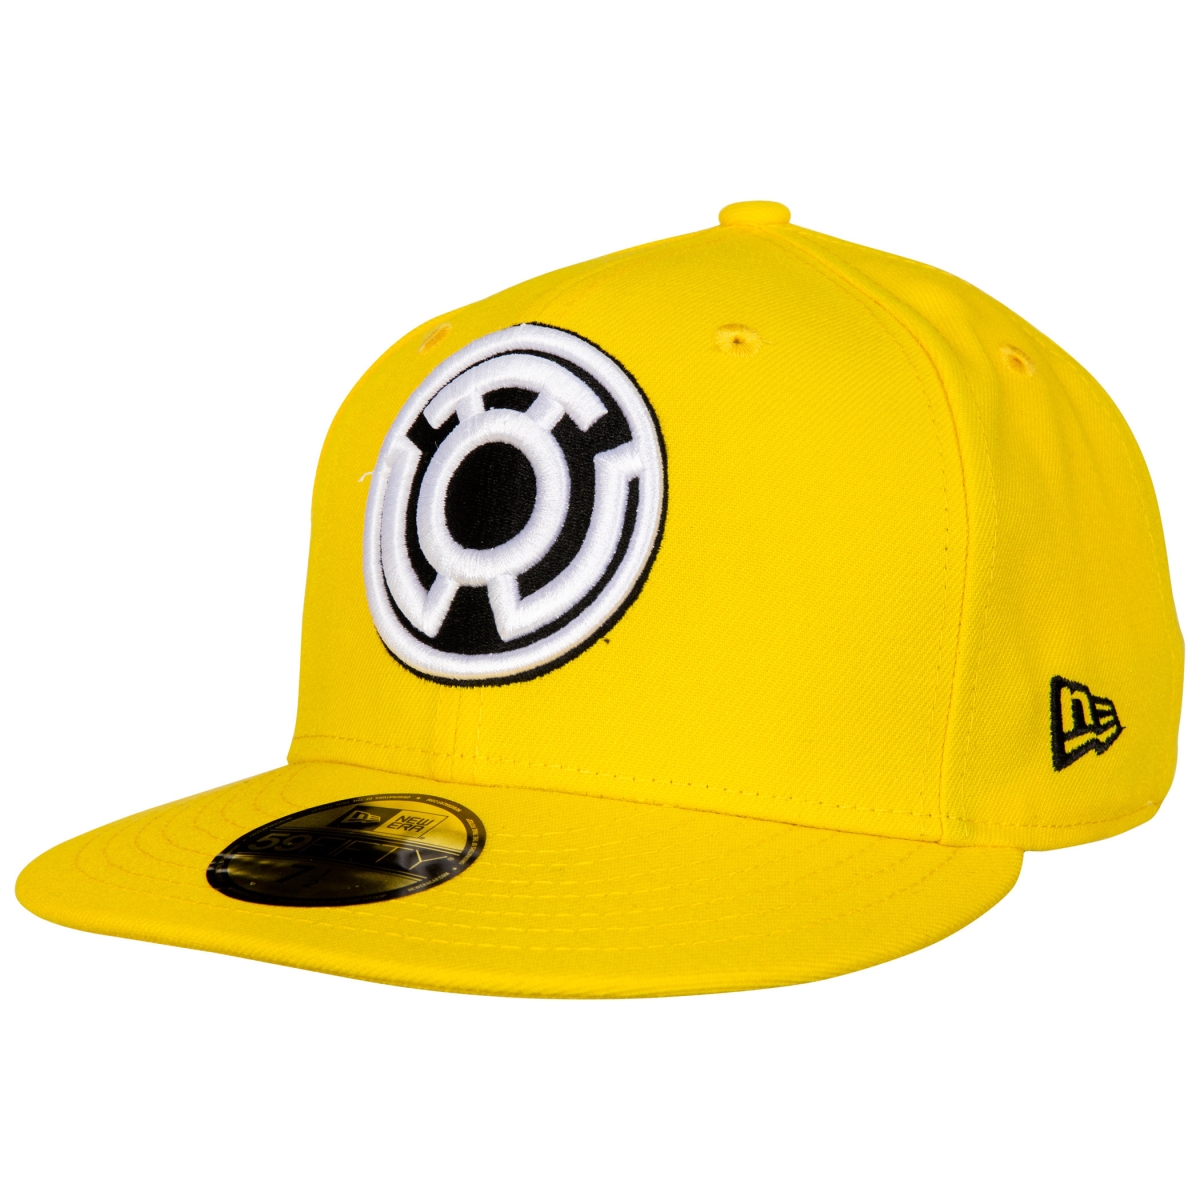 Picture of Yellow Lantern 813923-71-2fitted Sinestro Corp Color Block New Era 59Fifty Hat, 7.5 Fitted